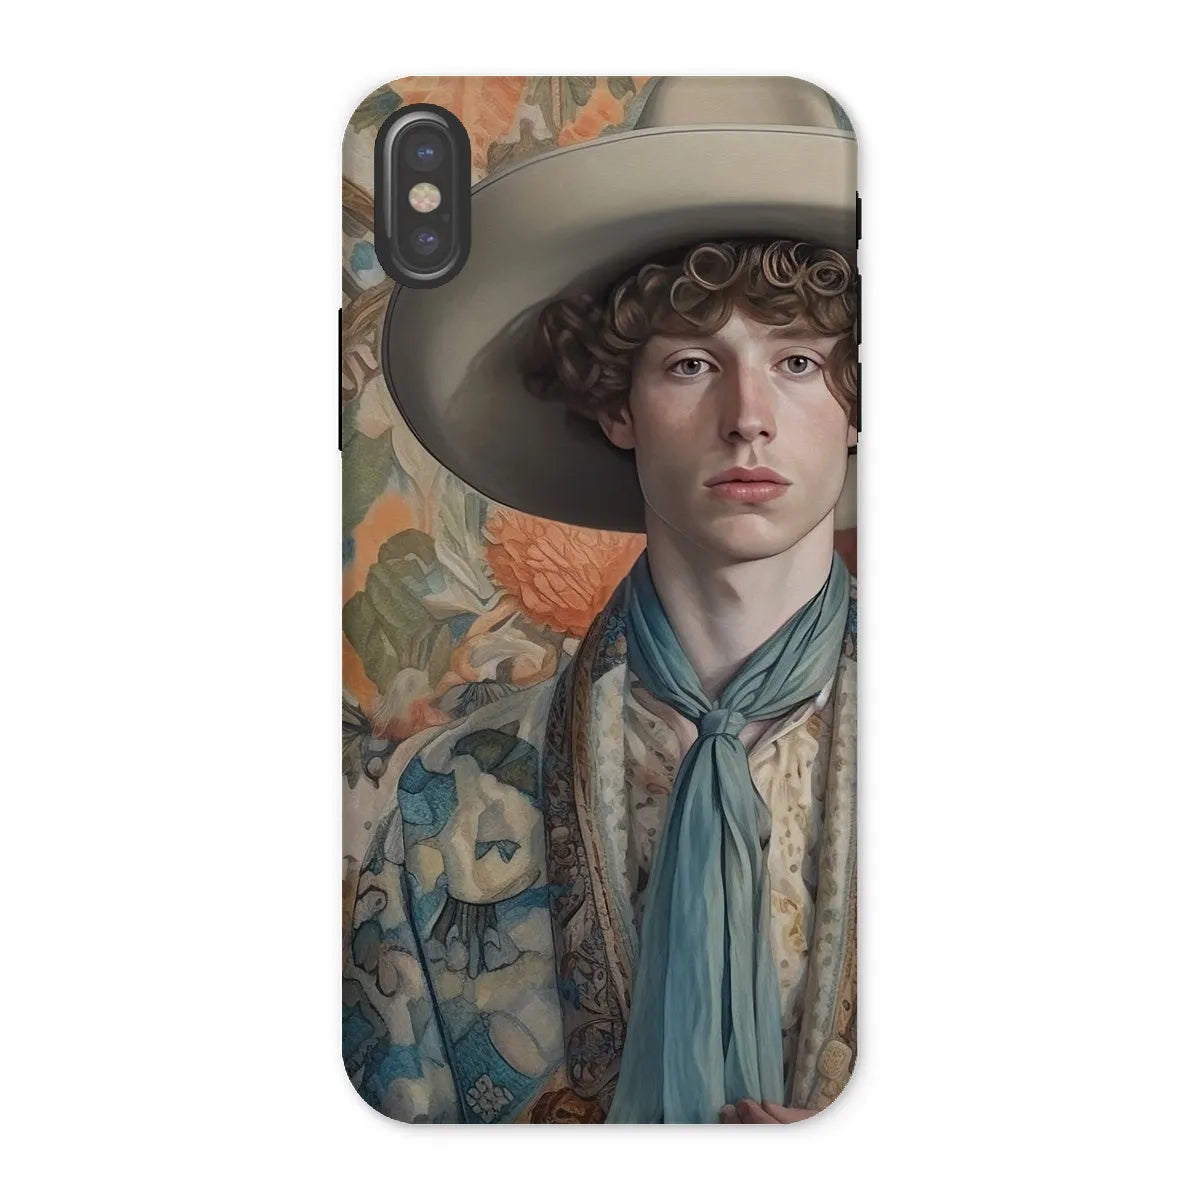 Theodore The Gay Cowboy - Dandy Gay Men Art Phone Case - Iphone x / Matte - Mobile Phone Cases - Aesthetic Art